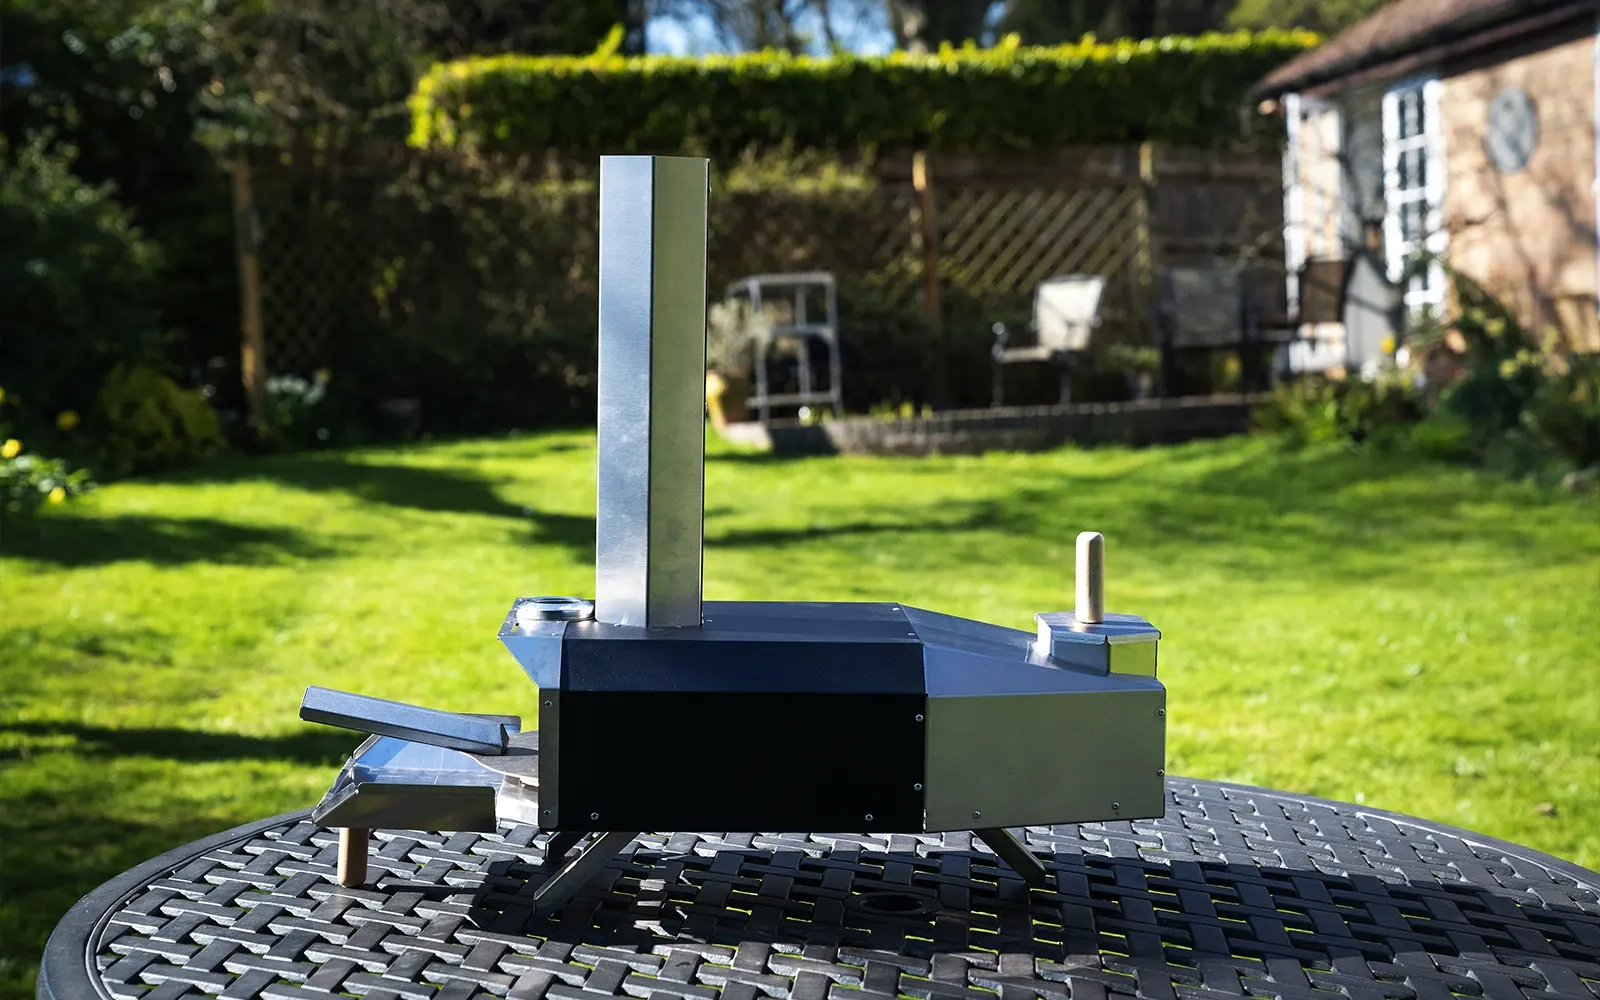 Pizza oven on a stainless steel table in a garden setting